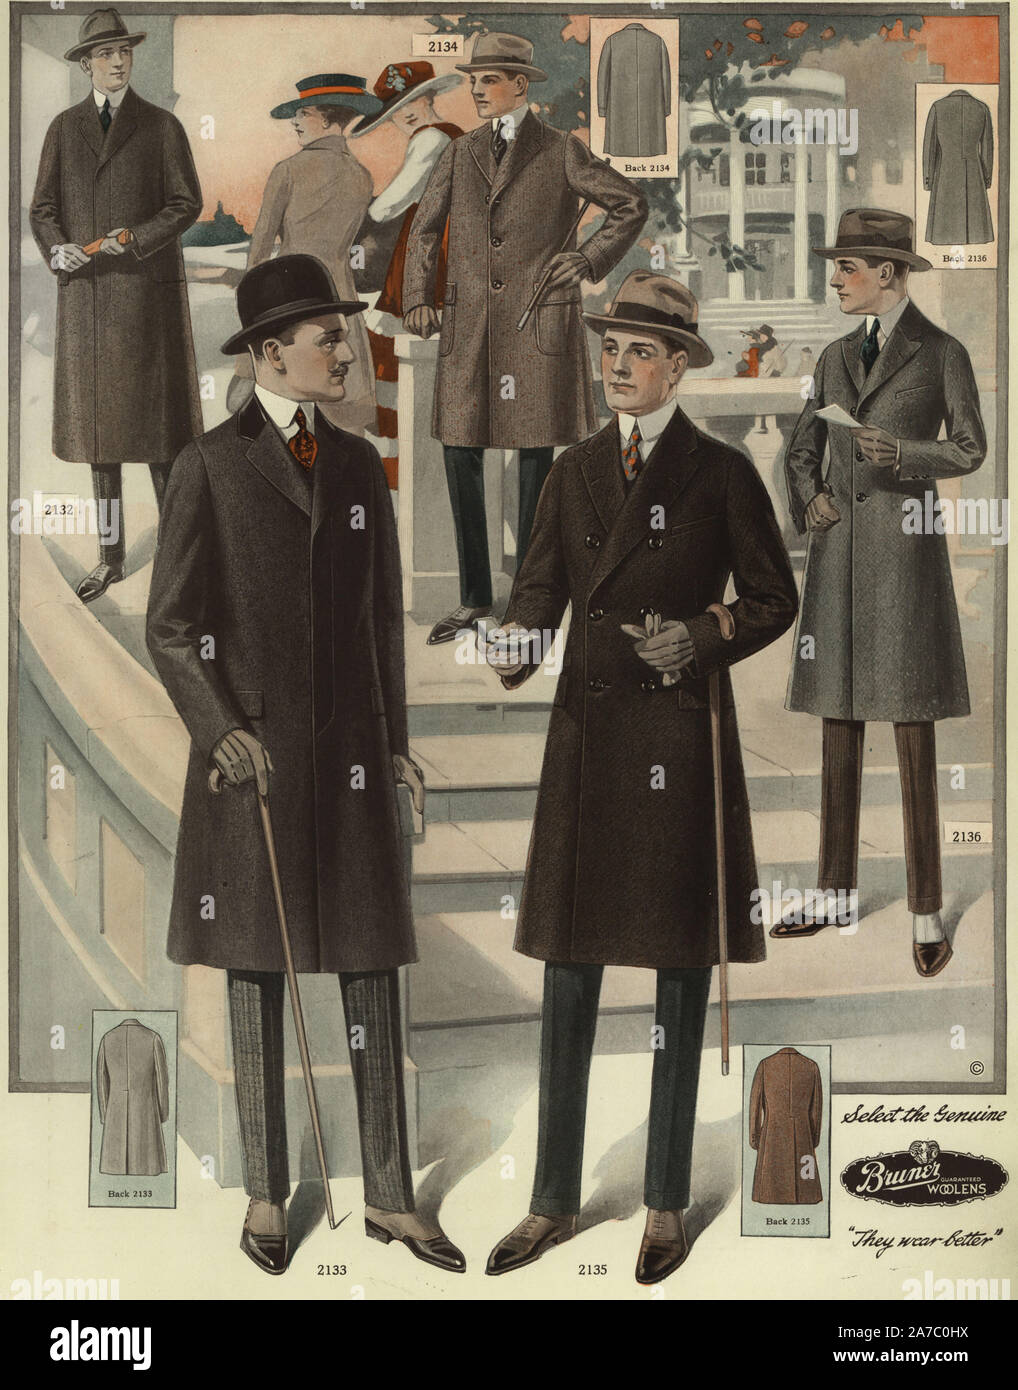 Men in box, fly-front and single-breated overcoats, with spats, canes, hats and gloves. Chromolithograph from a catalog of male winter fashions from Bruner Woolens, 1920. Stock Photo